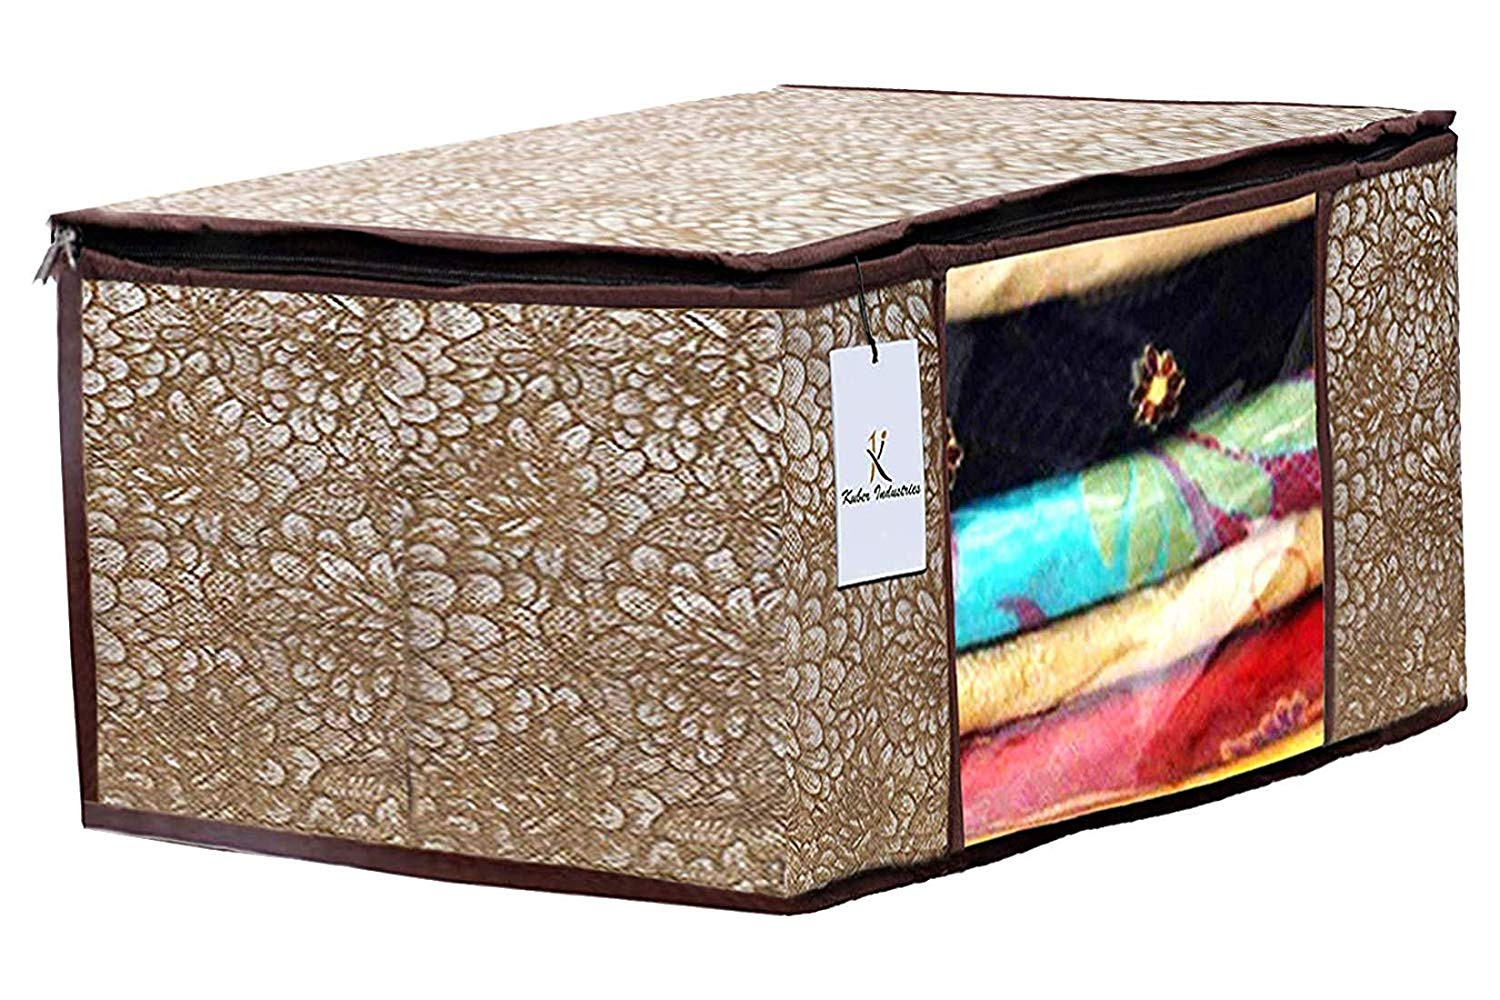 Kuber Industries Metalic Printed Non Woven Saree Cover And Underbed Storage Bag, Storage Organiser, Blanket Cover, Golden Brown & Gold -CTKTC42385